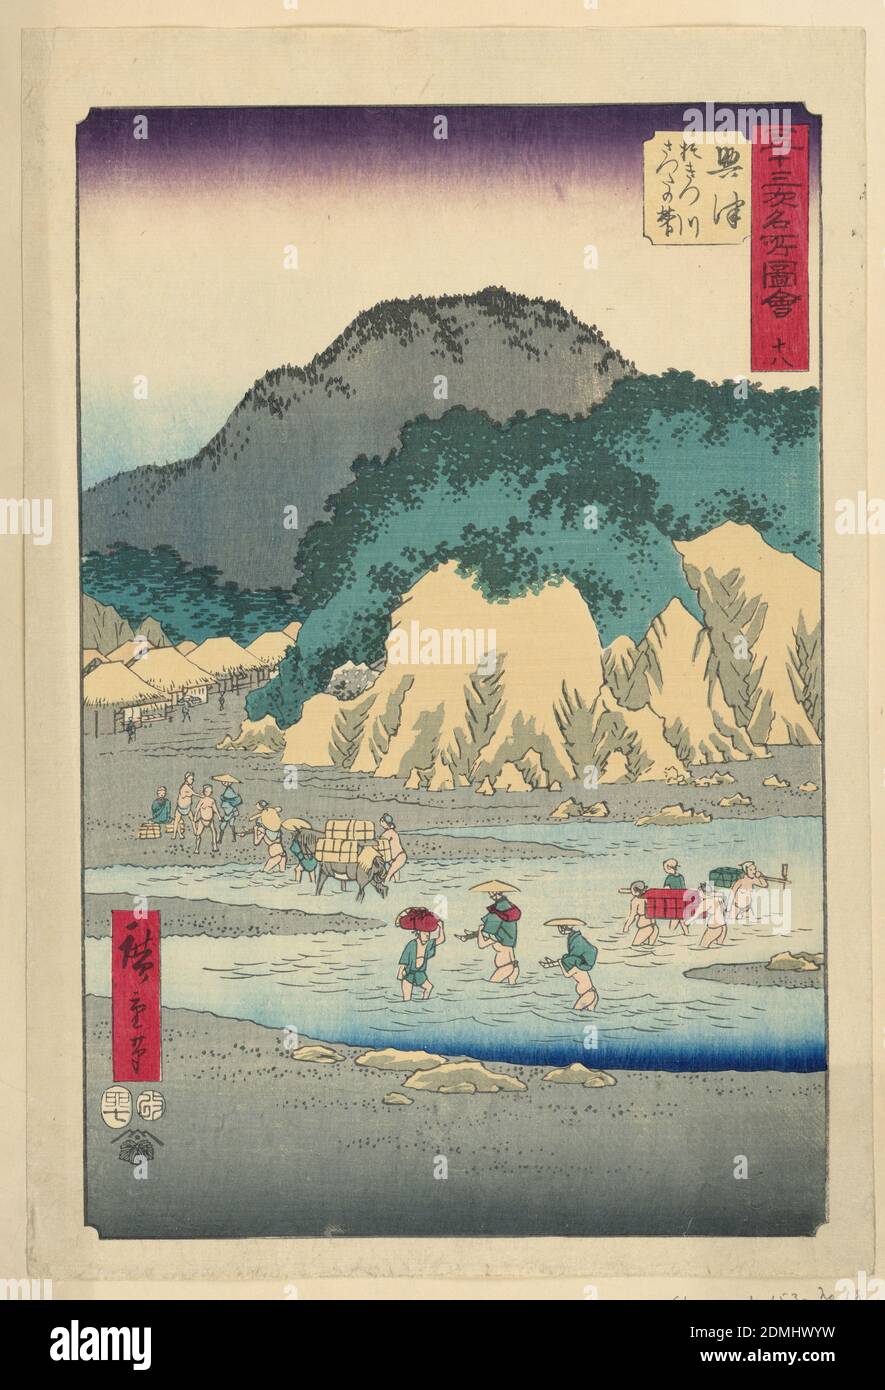 Okitsu from the series 53 Stations of Tokaido, Ando Hiroshige, Japanese, 1797–1858, Woodblock print in colored ink on paper, A dozen men are carrying cargo from a recently docked ship. Some men balance luggage on their heads while others pair up and balance the weight of larger containers between them. Rocky mountains segregated by colors give a sense of weight and prominence., Japan, 1855, landscapes, Print Stock Photo